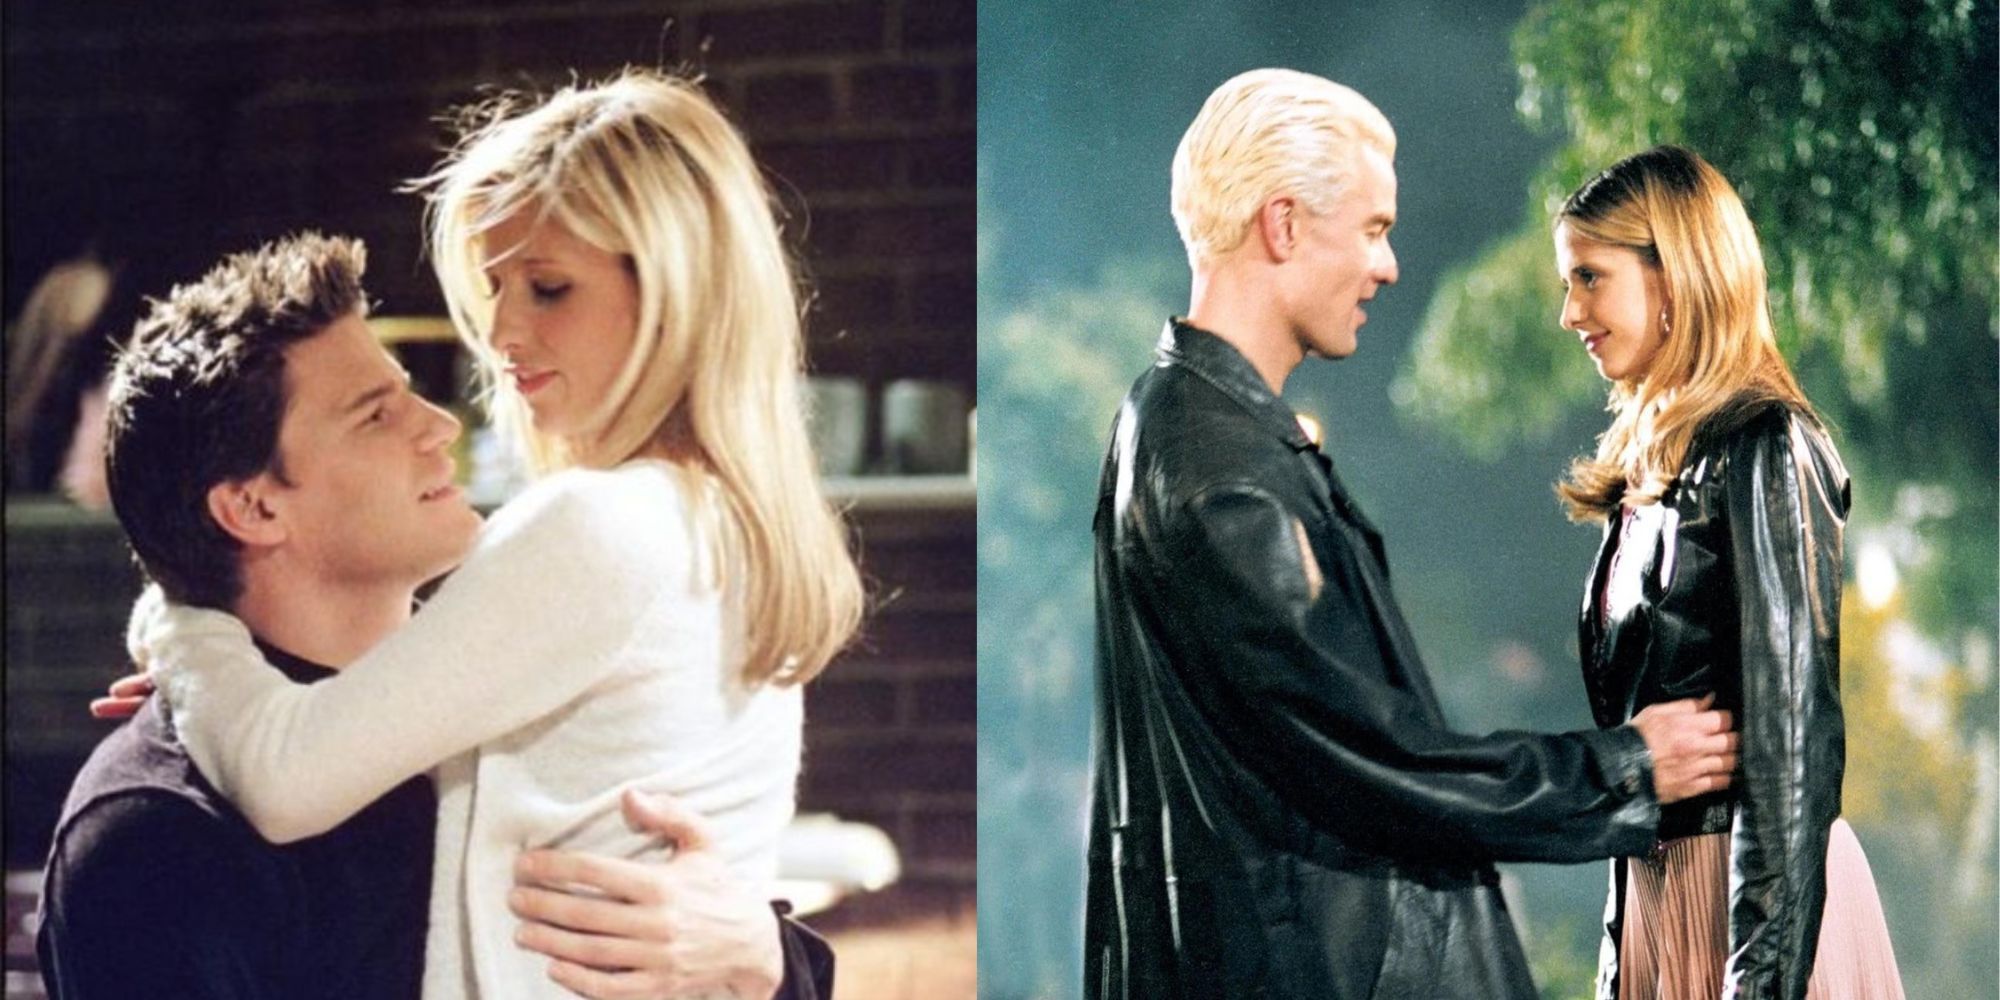 Down The Rabbit Hole: An Analysis of Spike and Buffy's Relationship